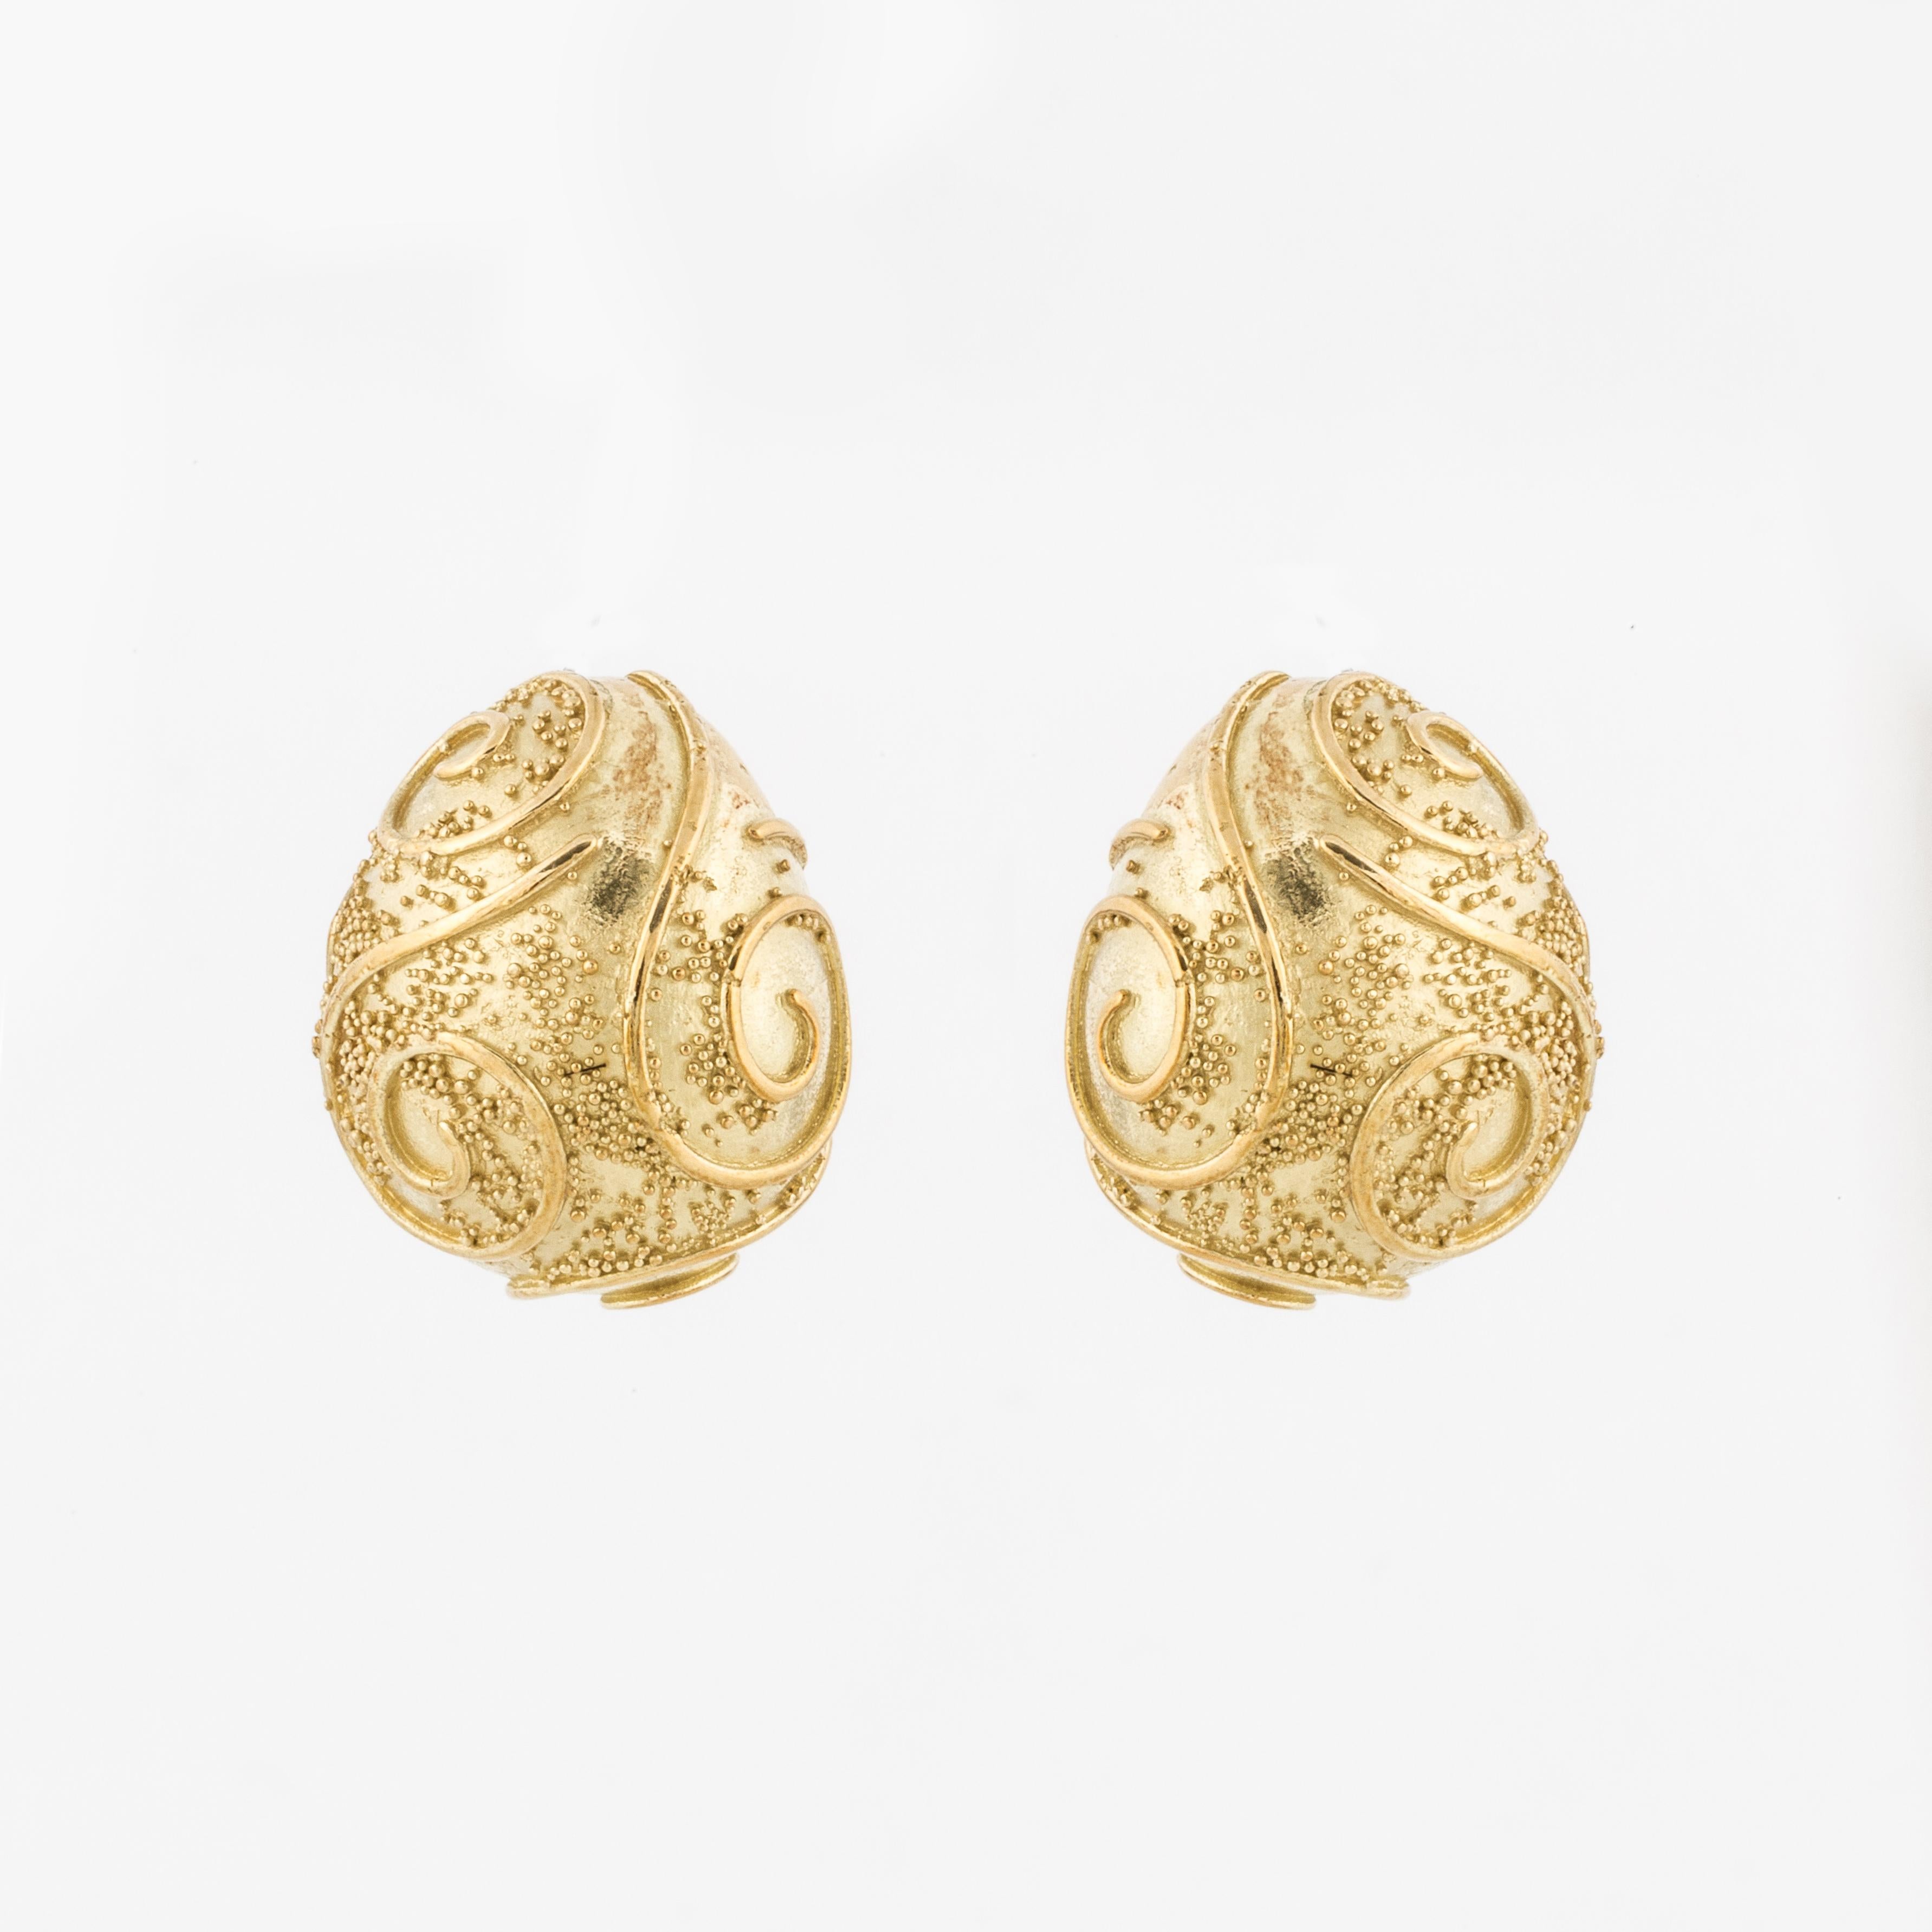 Elizabeth Gage San Marco earrings in 18K yellow gold.  Measure 1 inch long, 3/4 inches wide and stand 1/2 inch off the ear.  Earrings are clip backs.